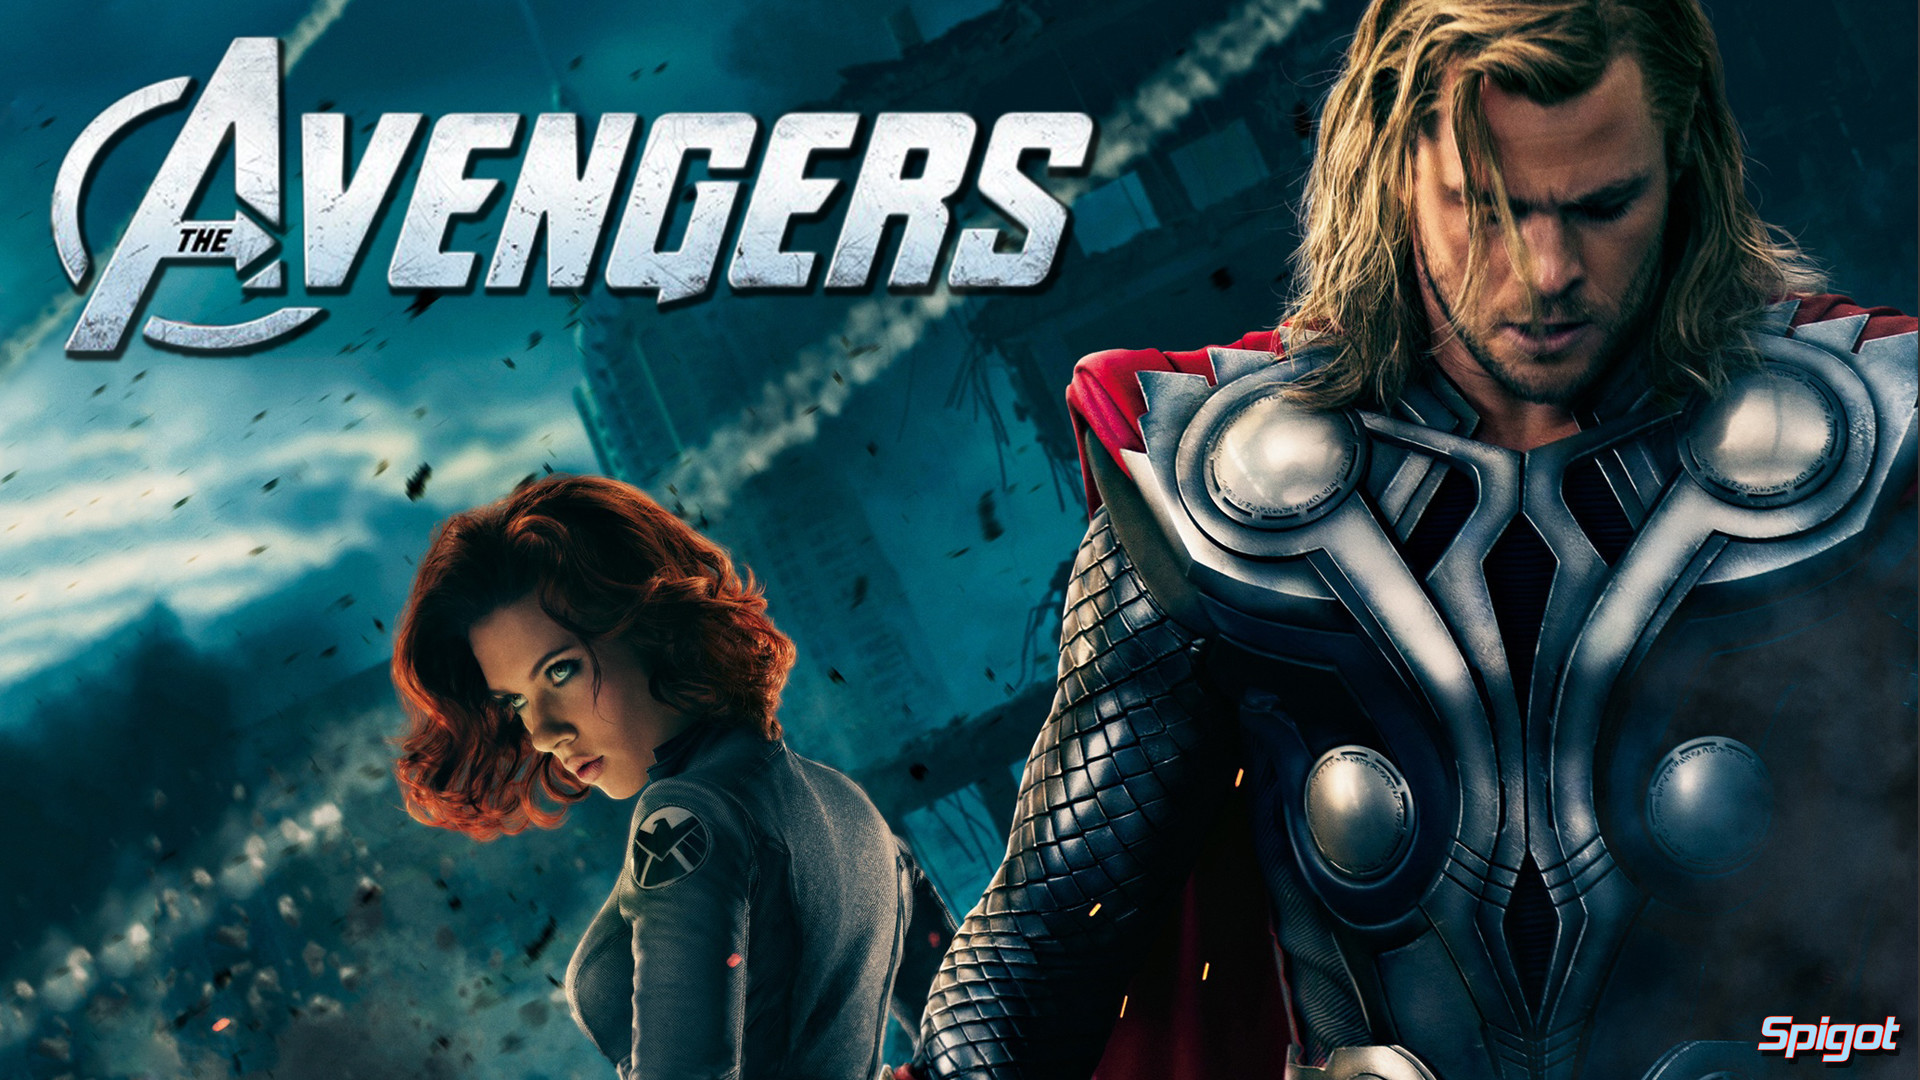 1920x1080 Just incase you havent had enough of my Avengers wallpapers here's yet  another, this one features Natasha Romanoff / Black Widow, (Scarlett  Johansson) and ...